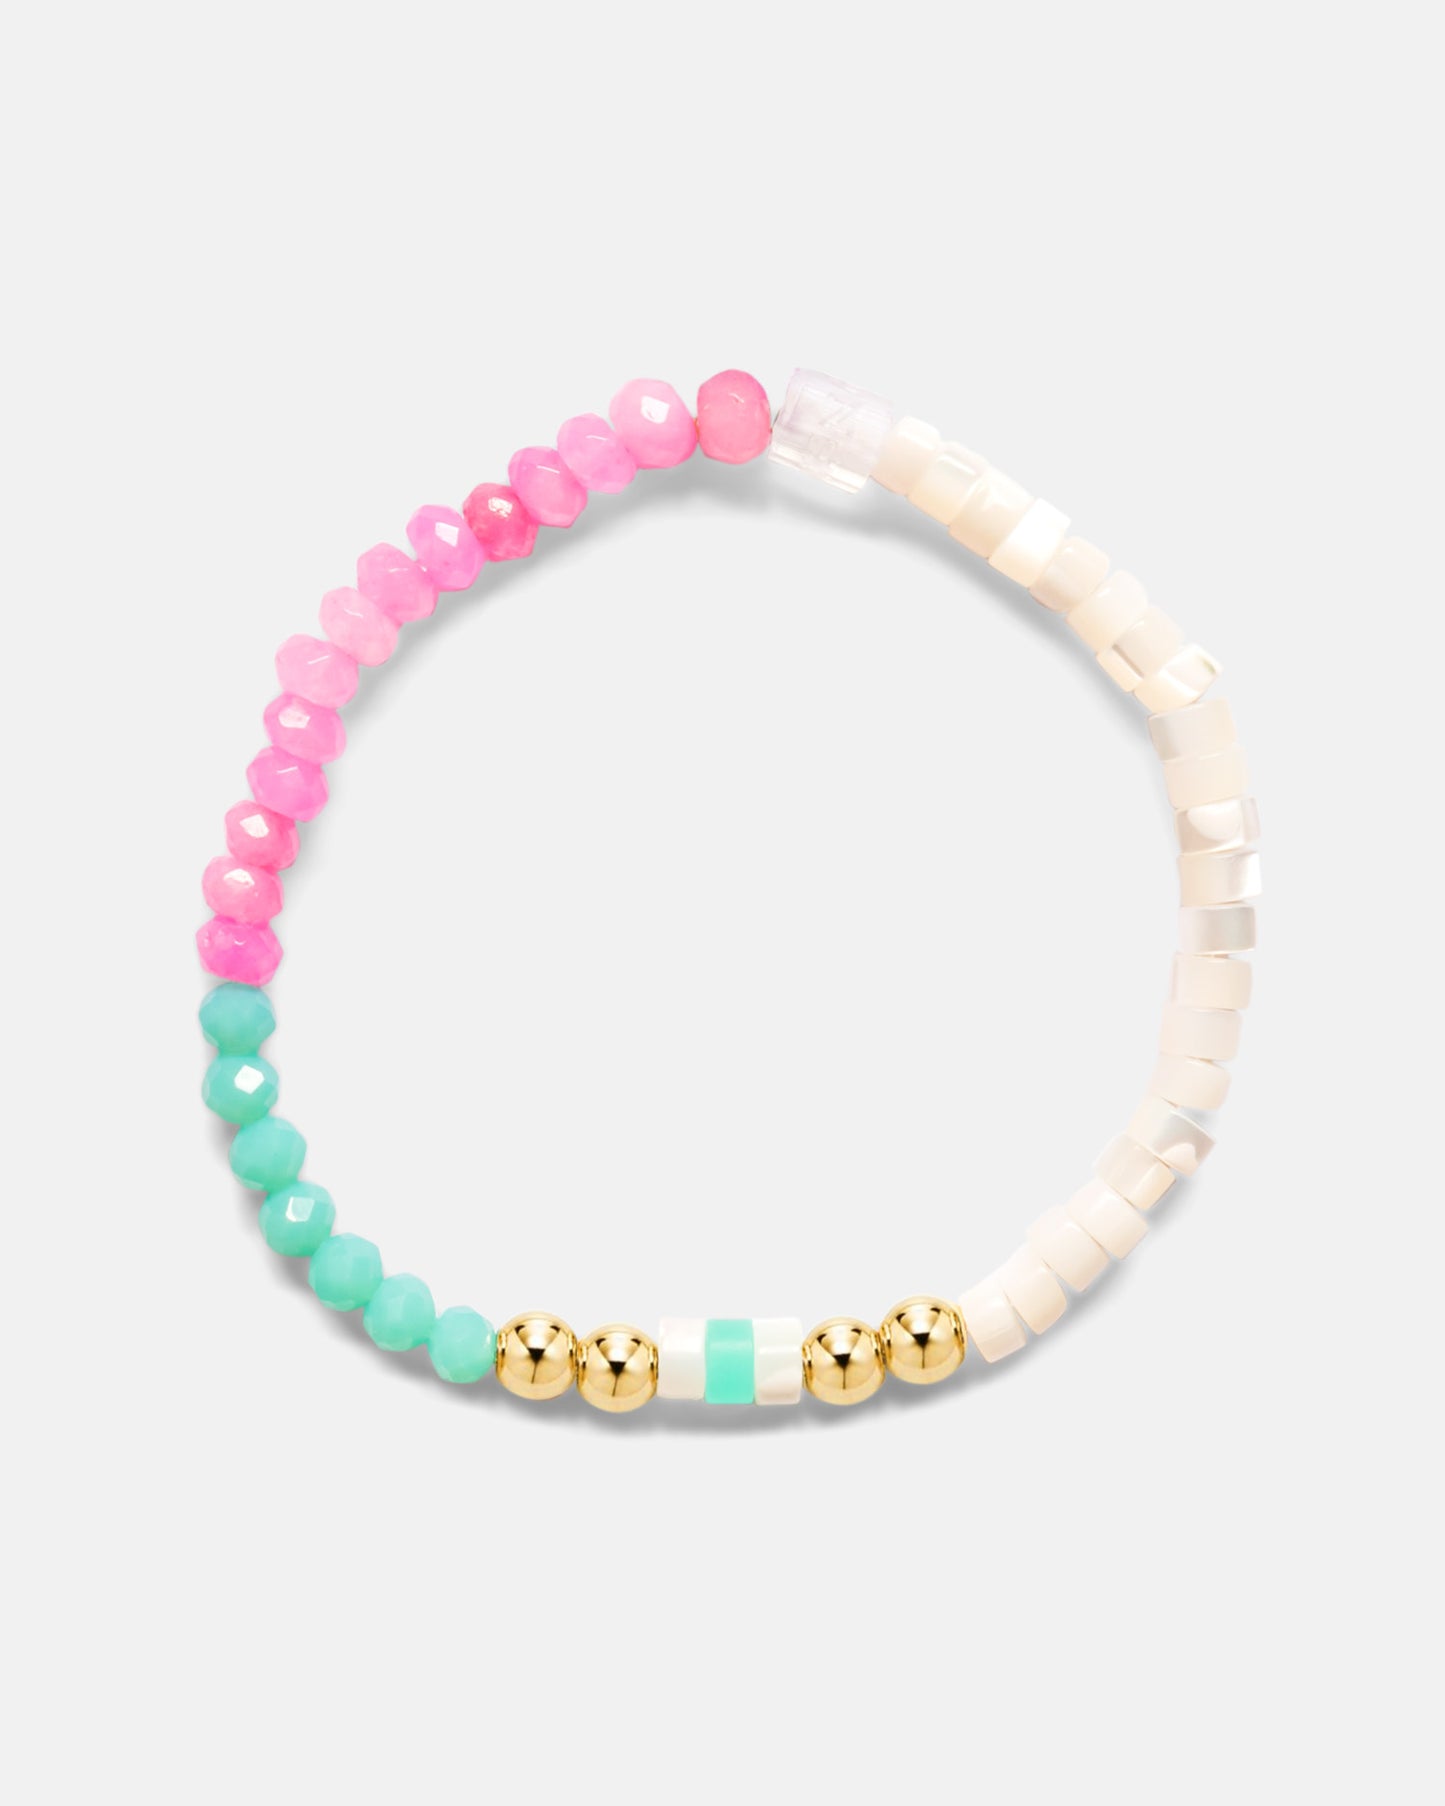 Beaded Bracelet with Turquoise and Pink beads with White Marble Discs and 18kt Gold Beads